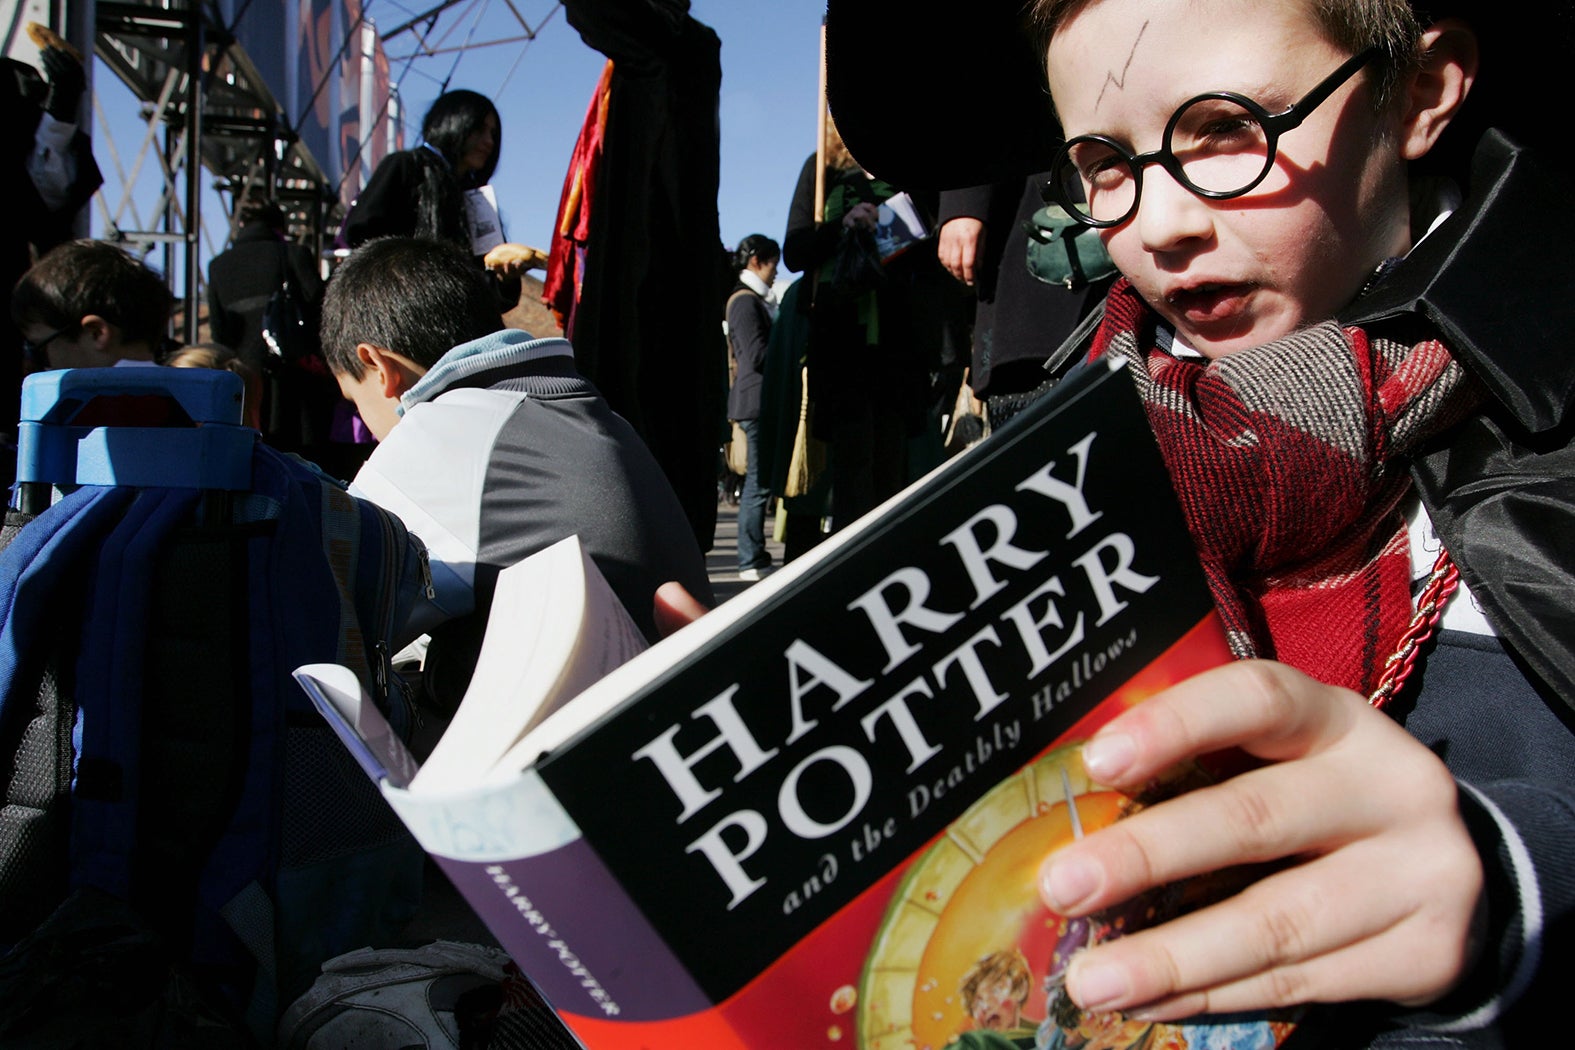 New York Times is peddling its own alternative facts over JK Rowling